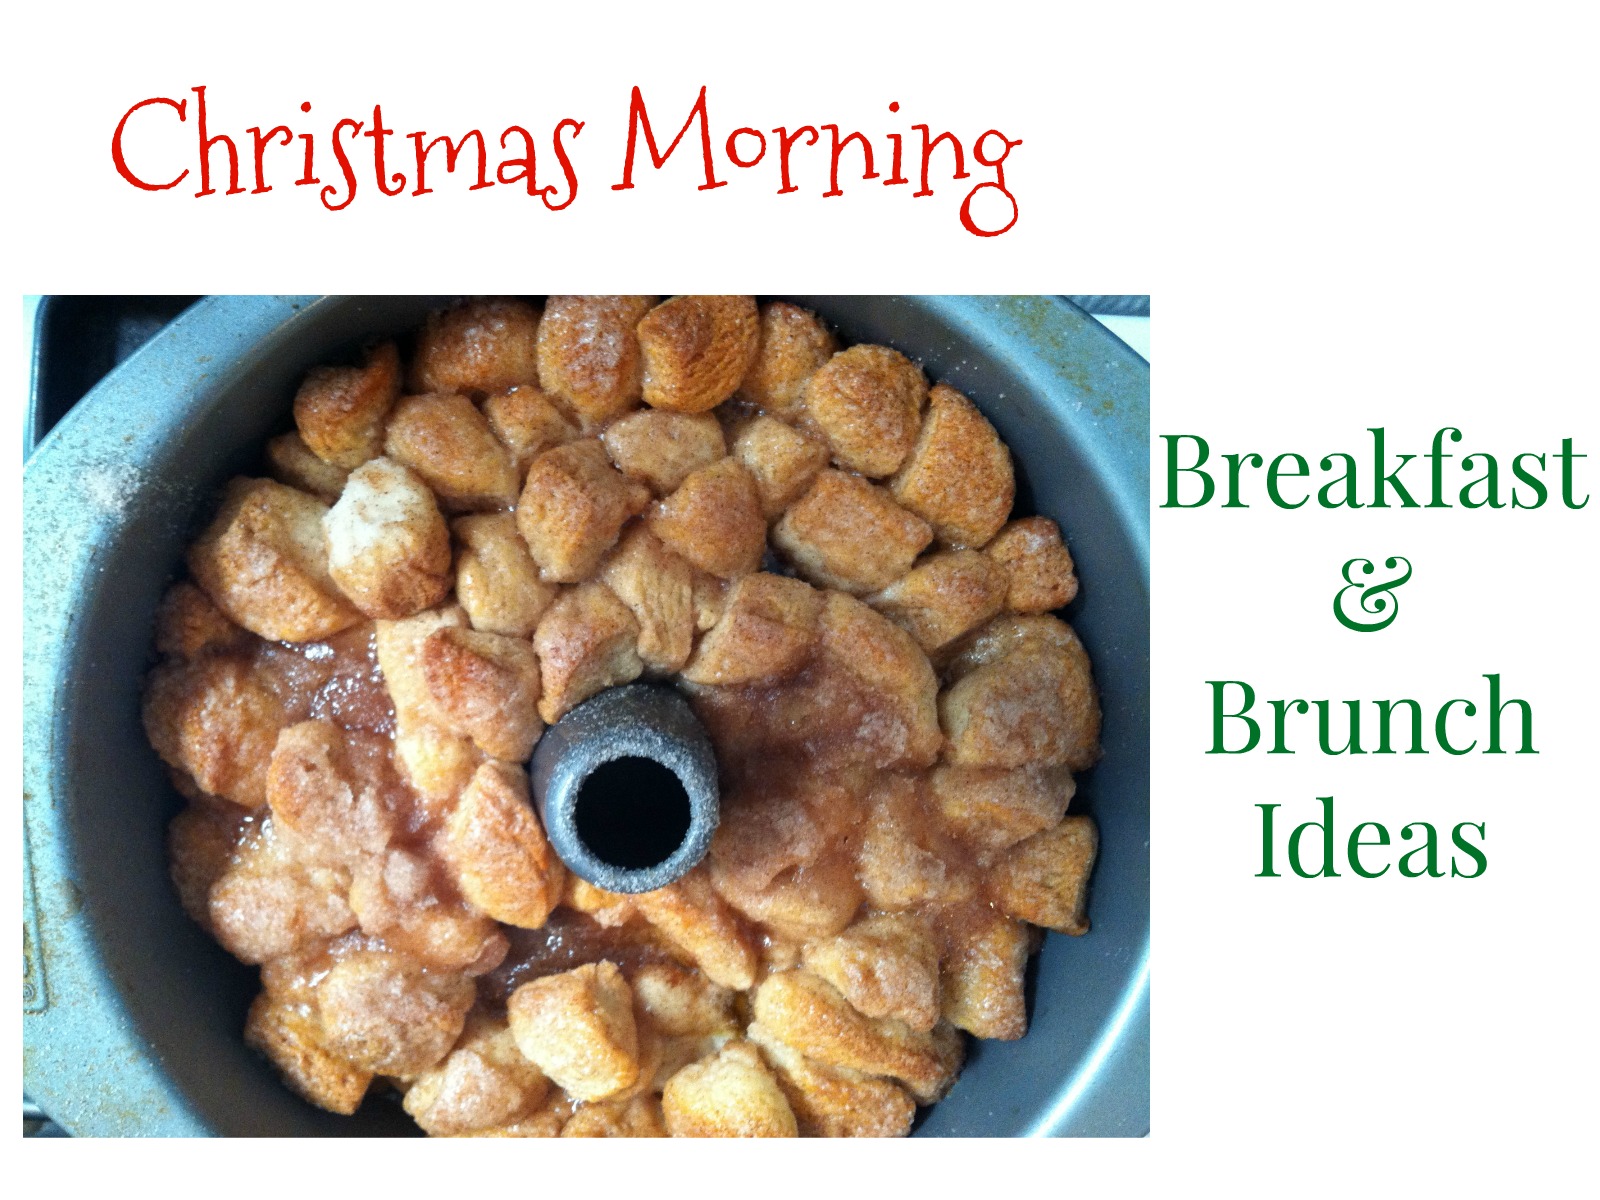 Christmas Morning Breakfast and Brunch Ideas | AlwaysMovingMommy.com | You should spend Christmas morning with your loved ones, not slaving over the stove. Check out these quick and easy breakfast and brunch ideas.